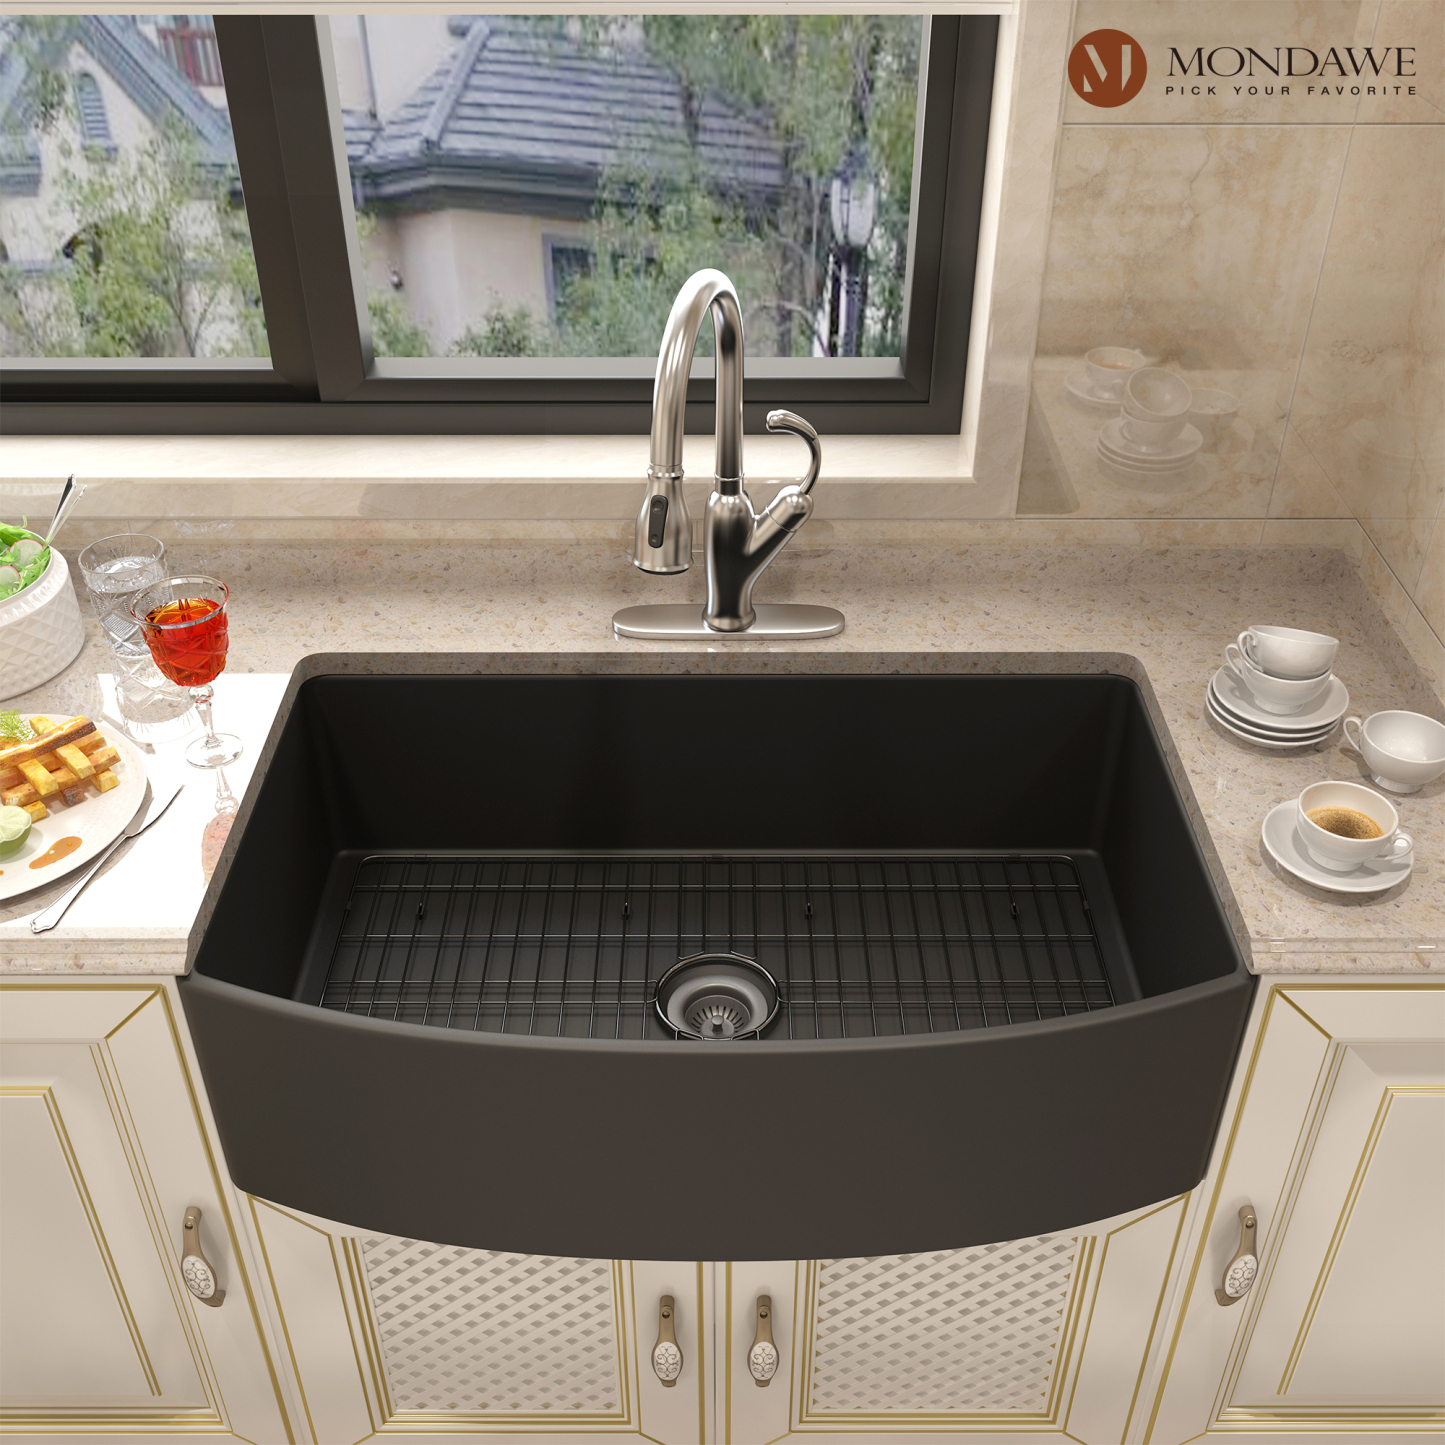 Farmhouse 33 In. Single Bowl Fireclay Kitchen Sink Comes With Pull Down Kitchen Faucet -Mondawe